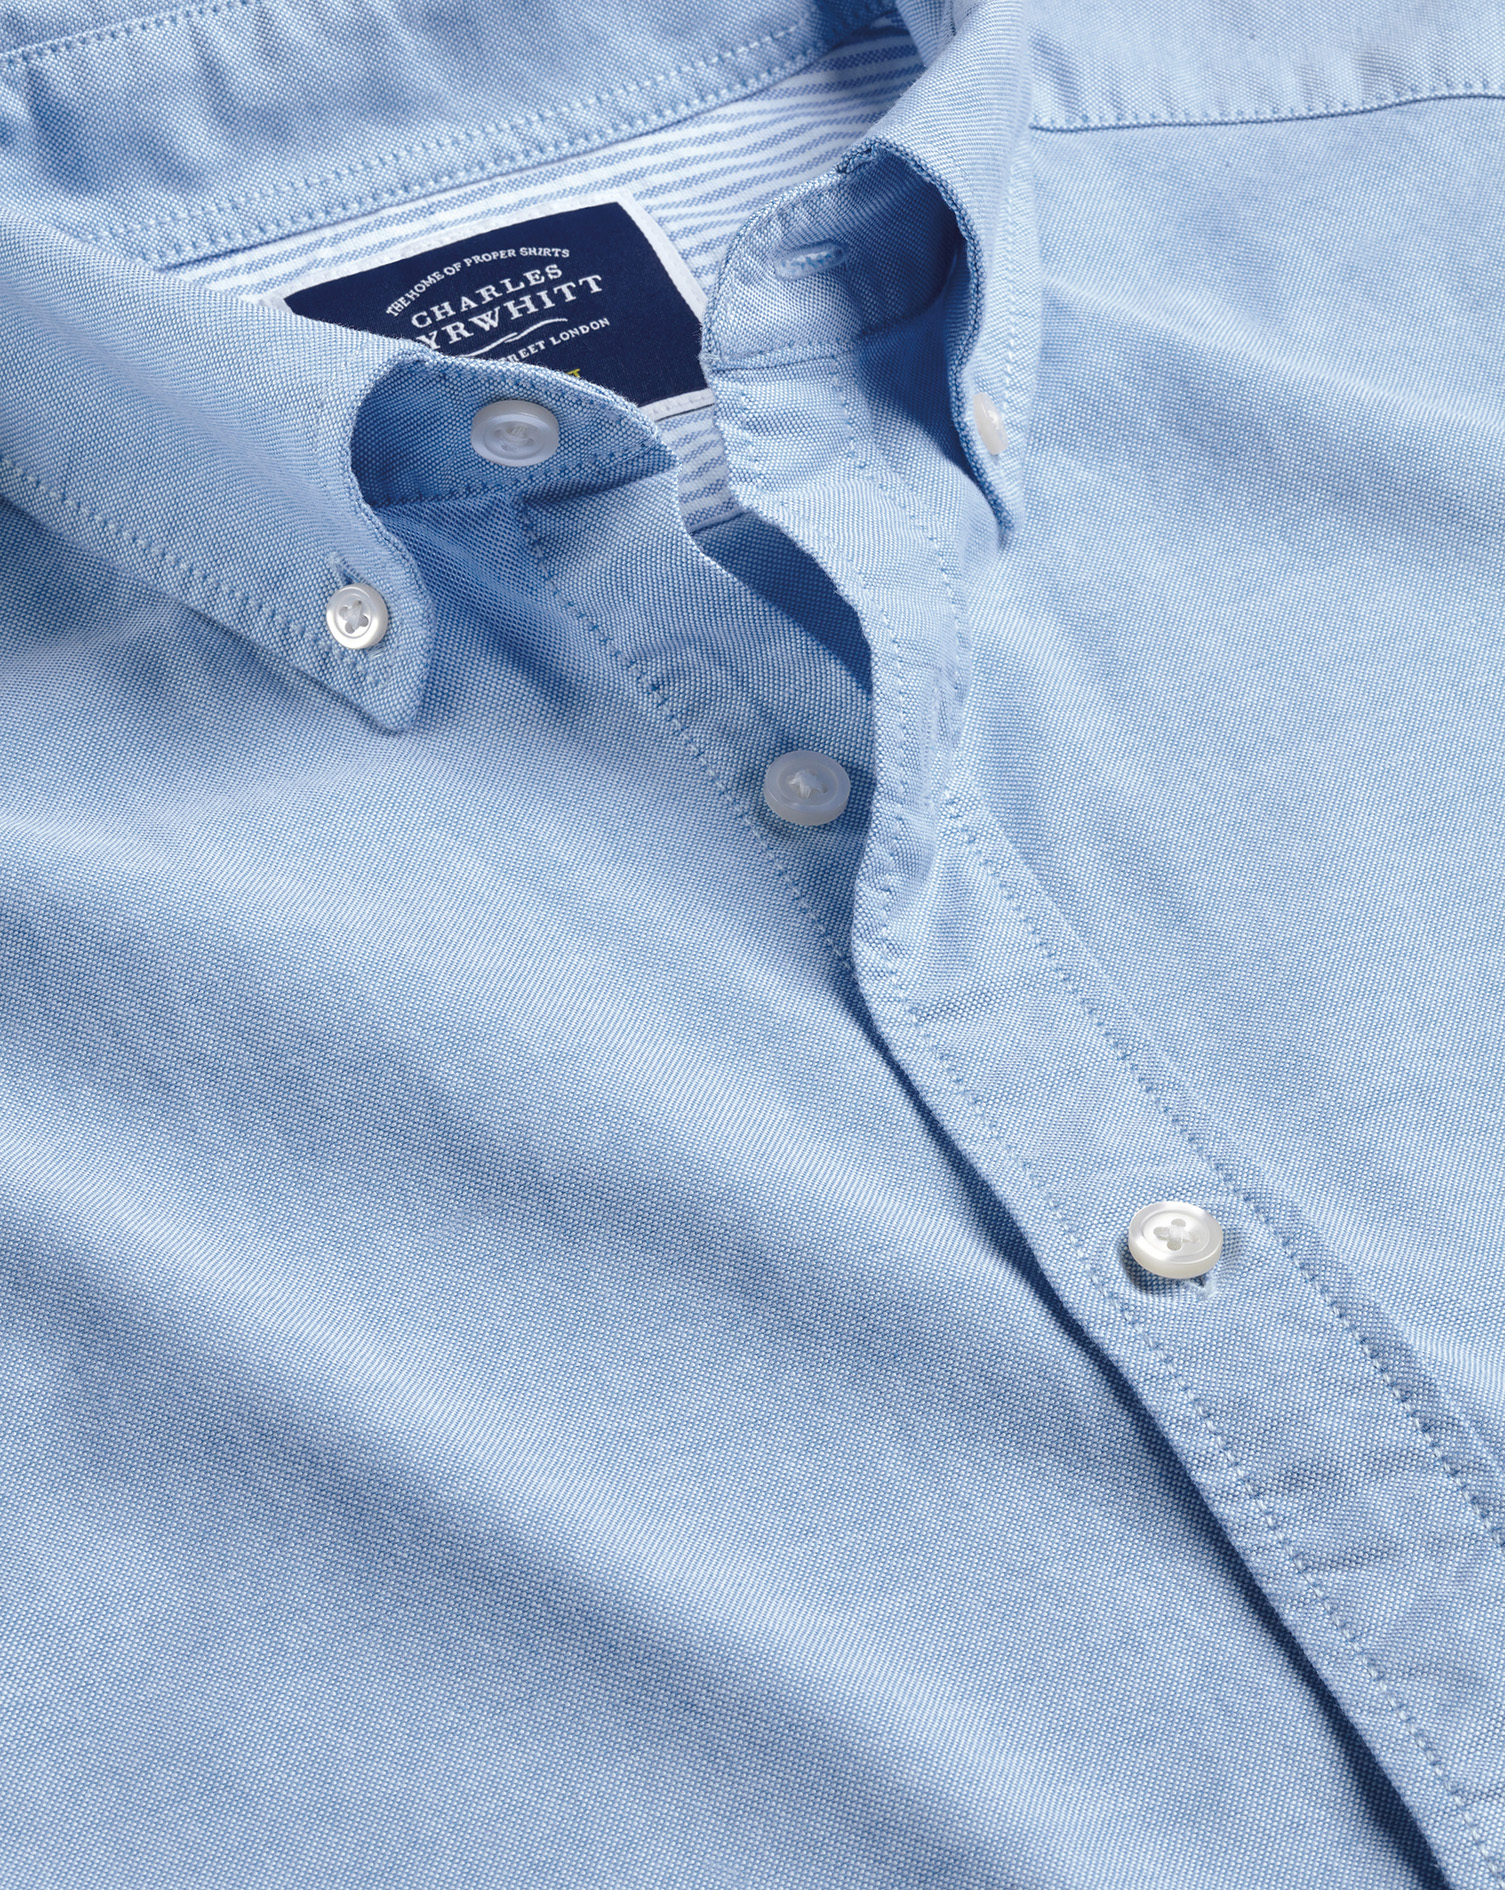 Button-Down Collar Washed Oxford Short Sleeve Cotton Casual Shirt - Sky Blue Single Cuff Size XXL
